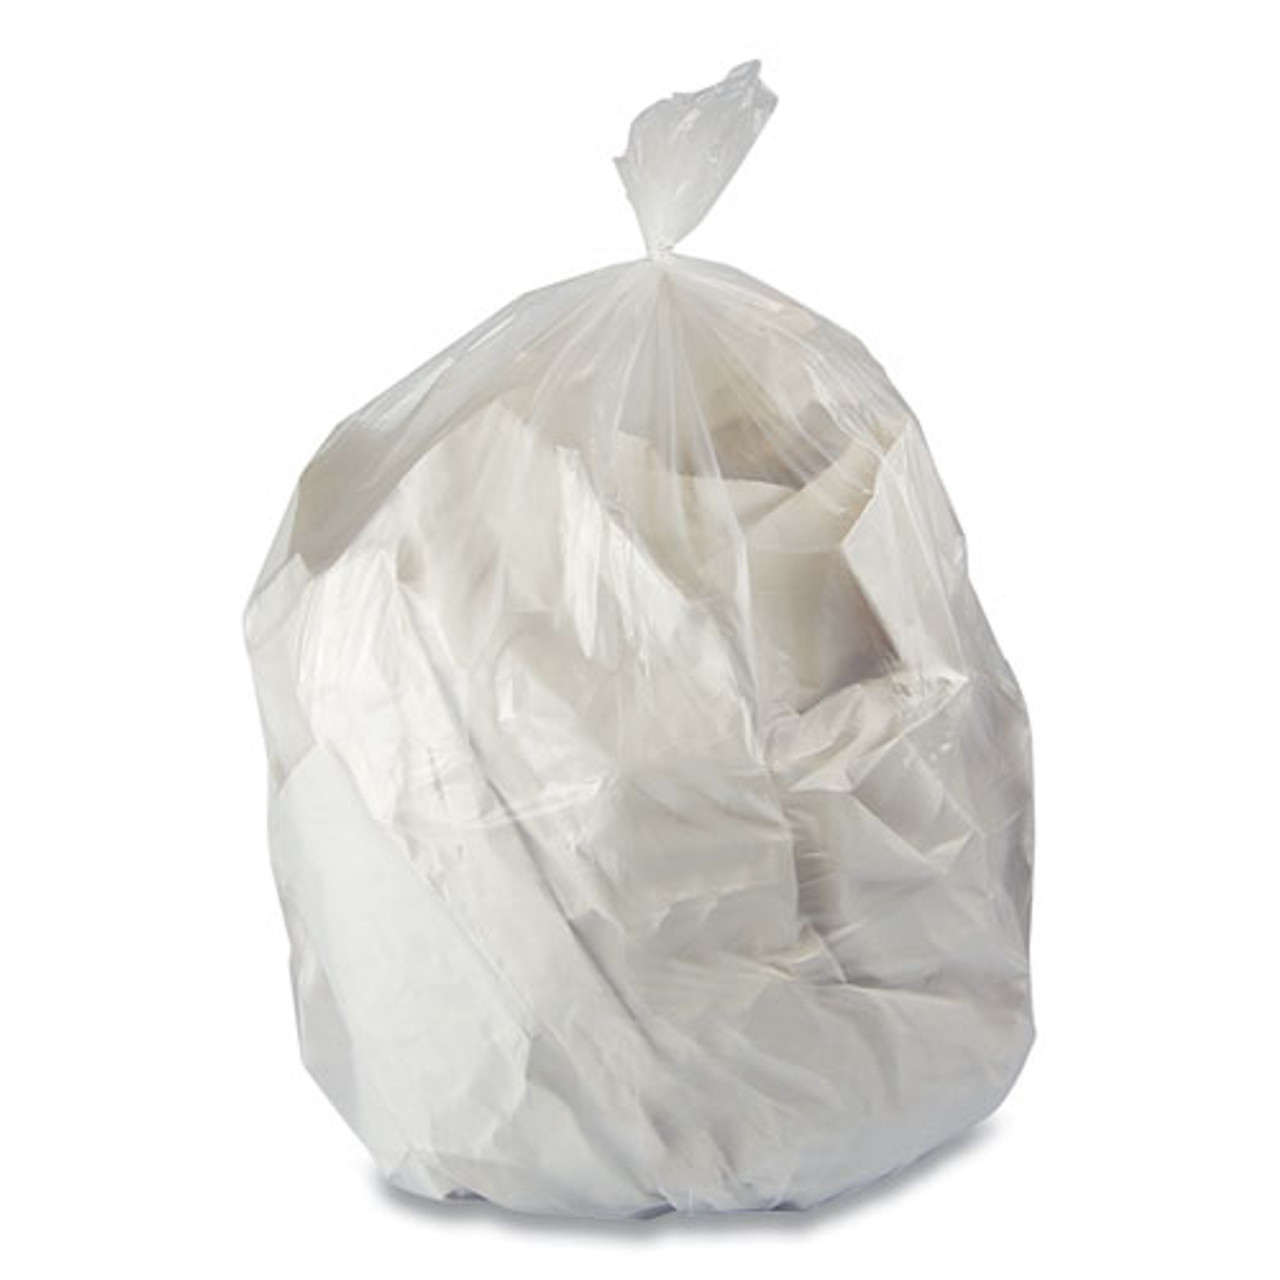 Commercial trash bags 60 gallon 38x65 2.5 mil case of 50